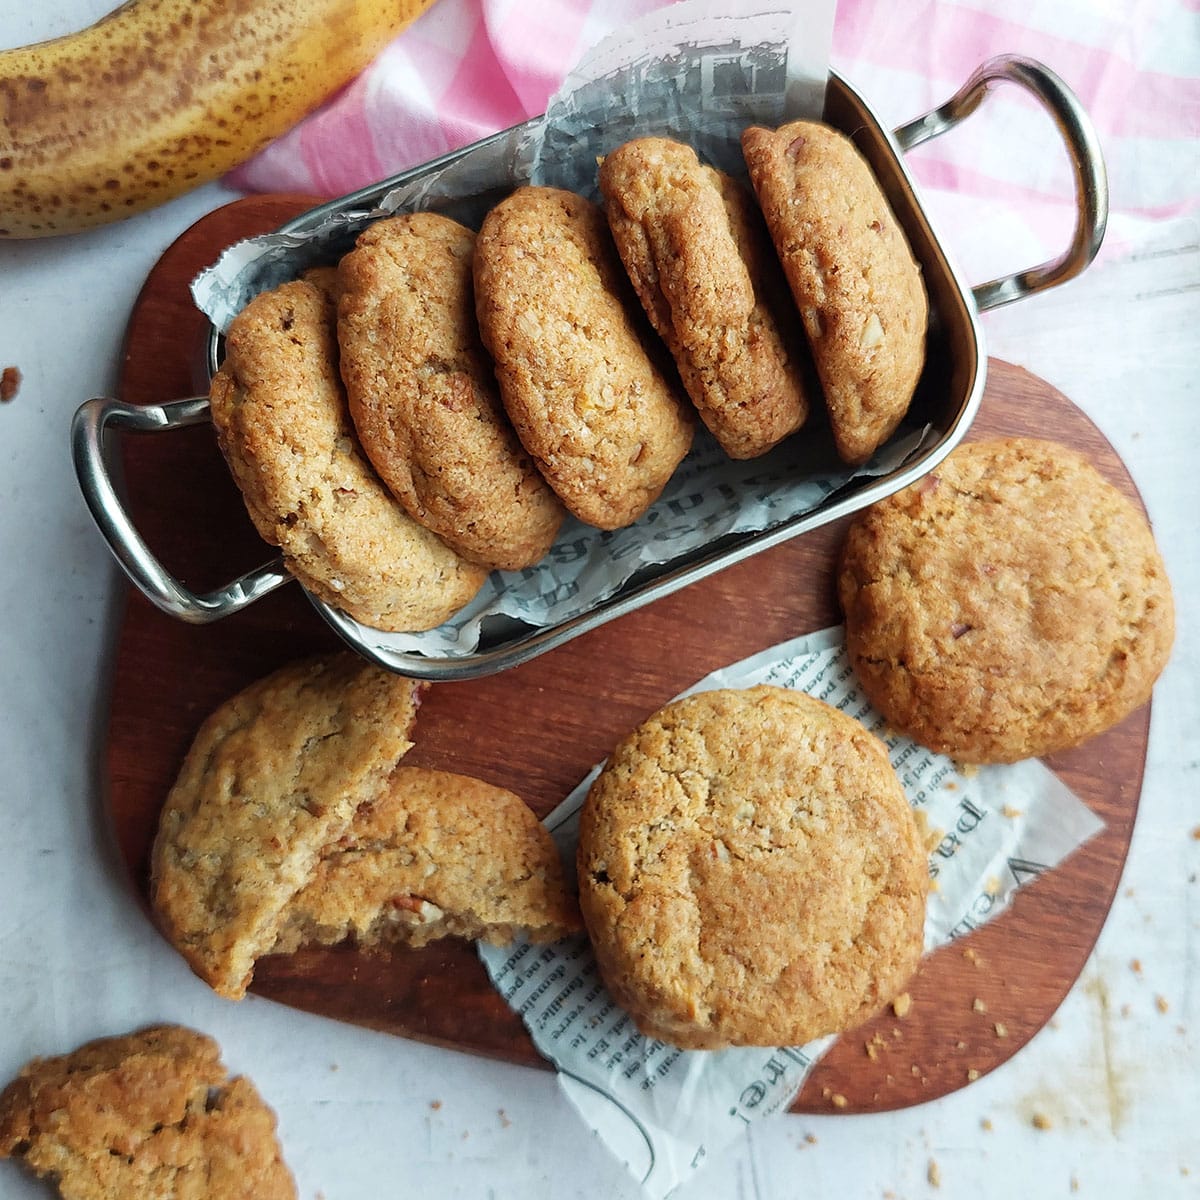 You have endless options for customizing these Banana Bread Cookies.